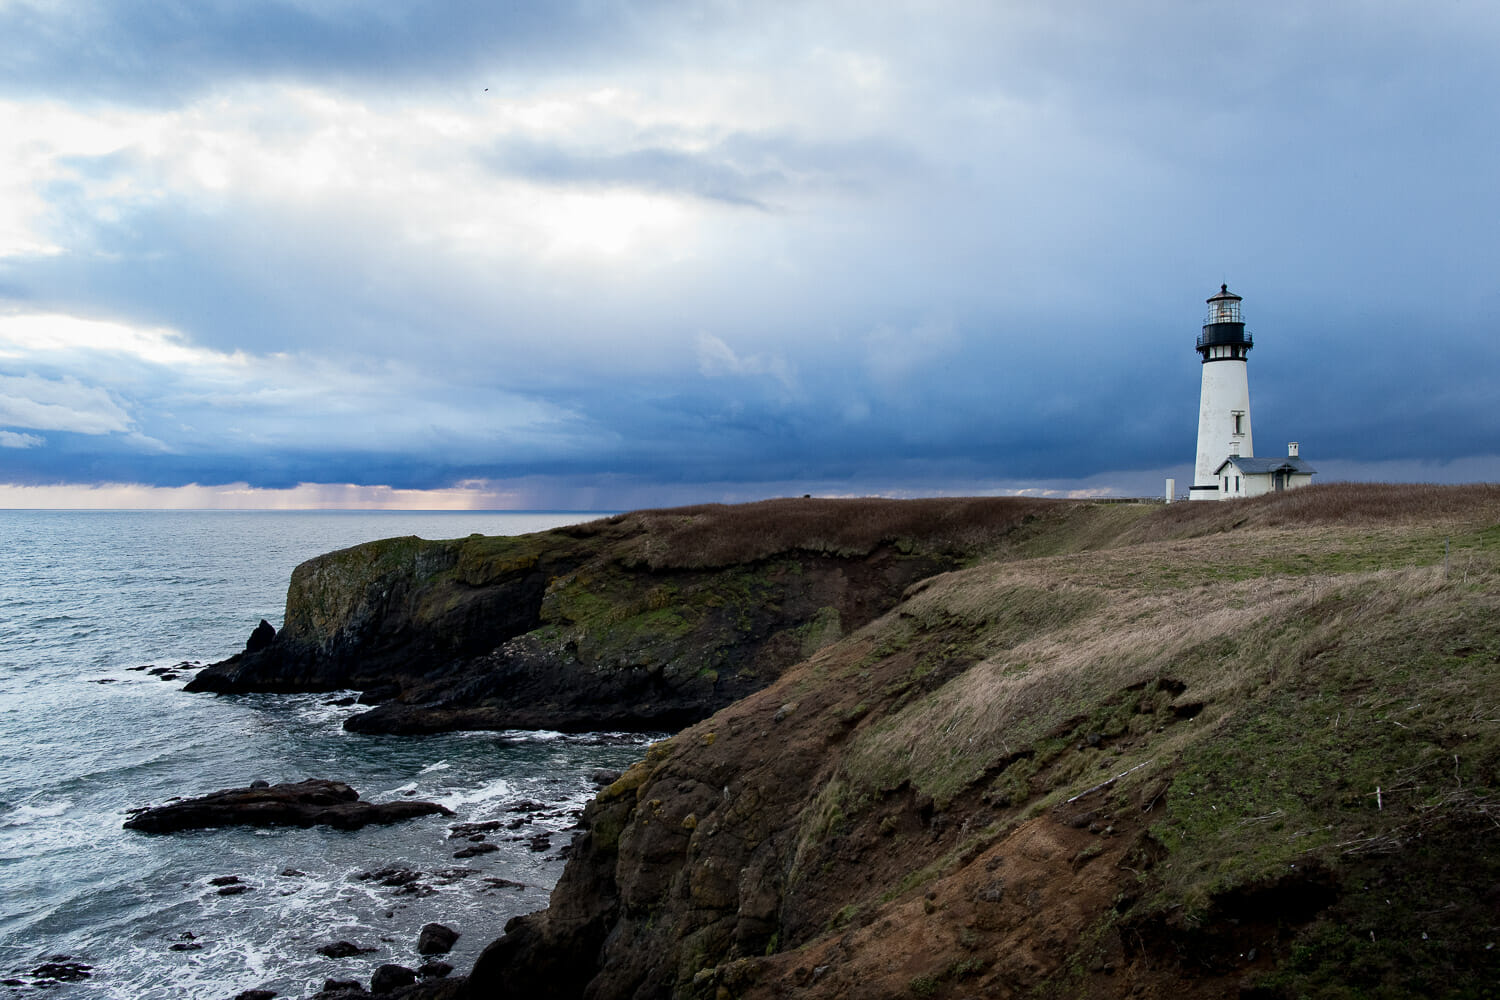 Oregon's Yaquina Head lighthouse on the cliff above a stormy ocean